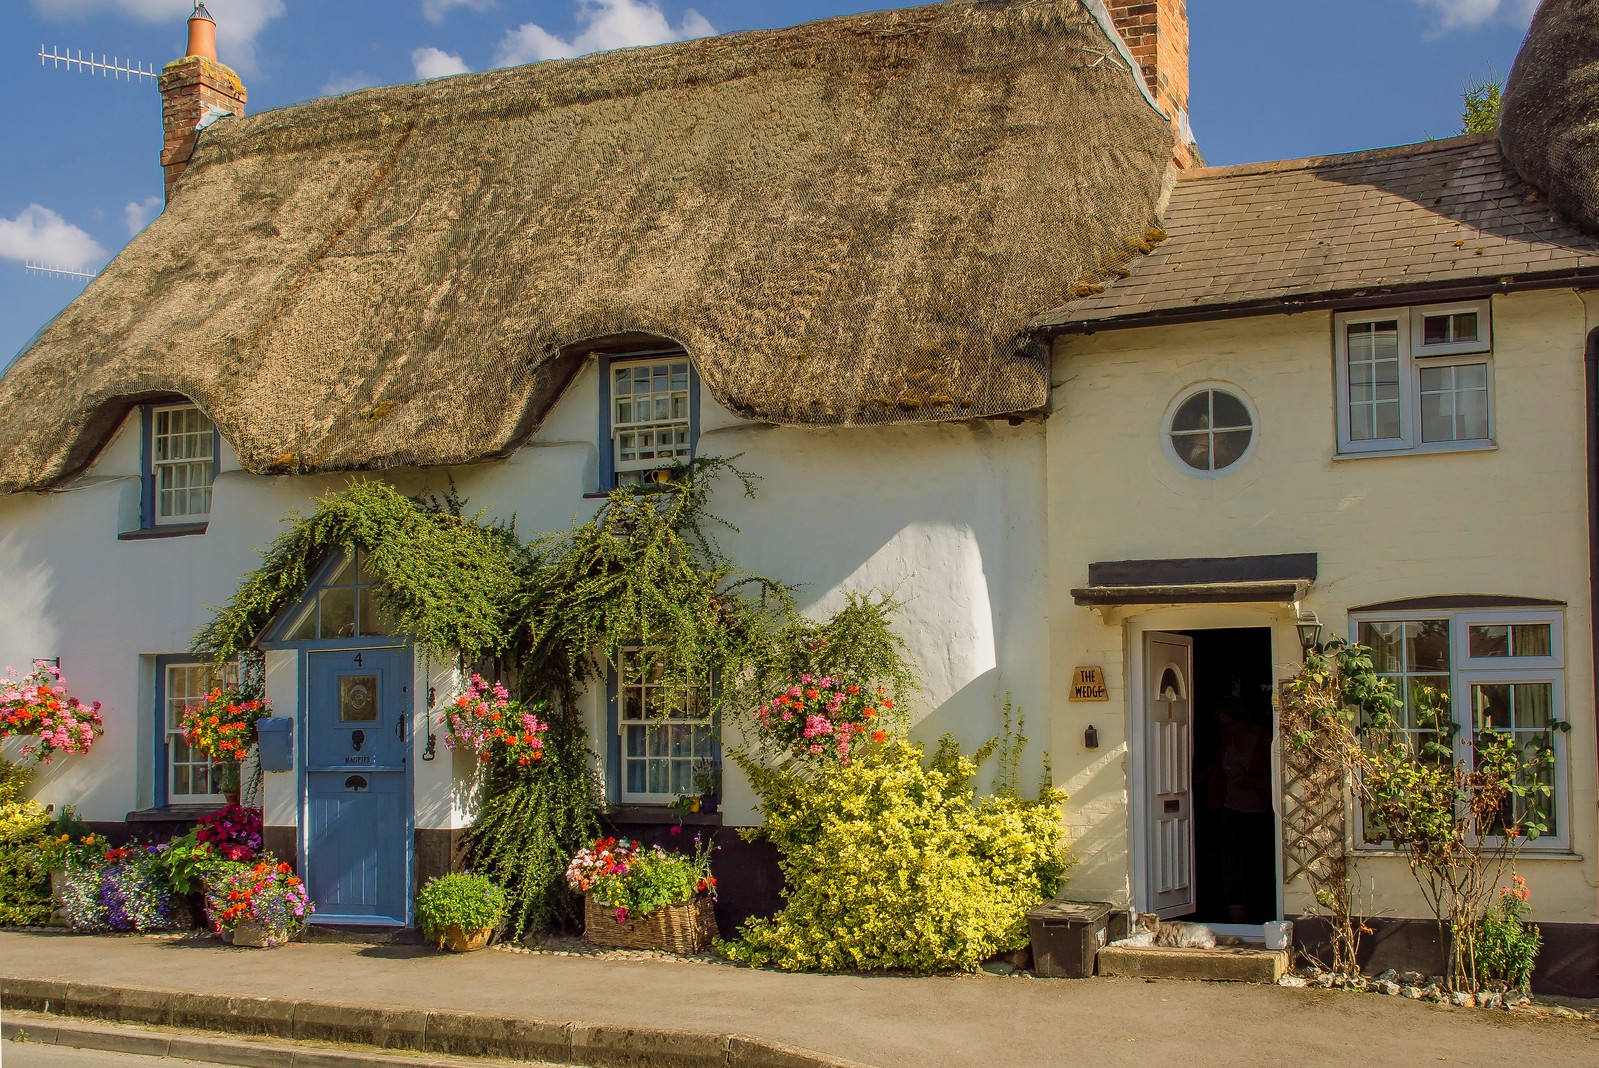 Beautiful cottages at Haxton in Wiltshire. Credit Anguskirk